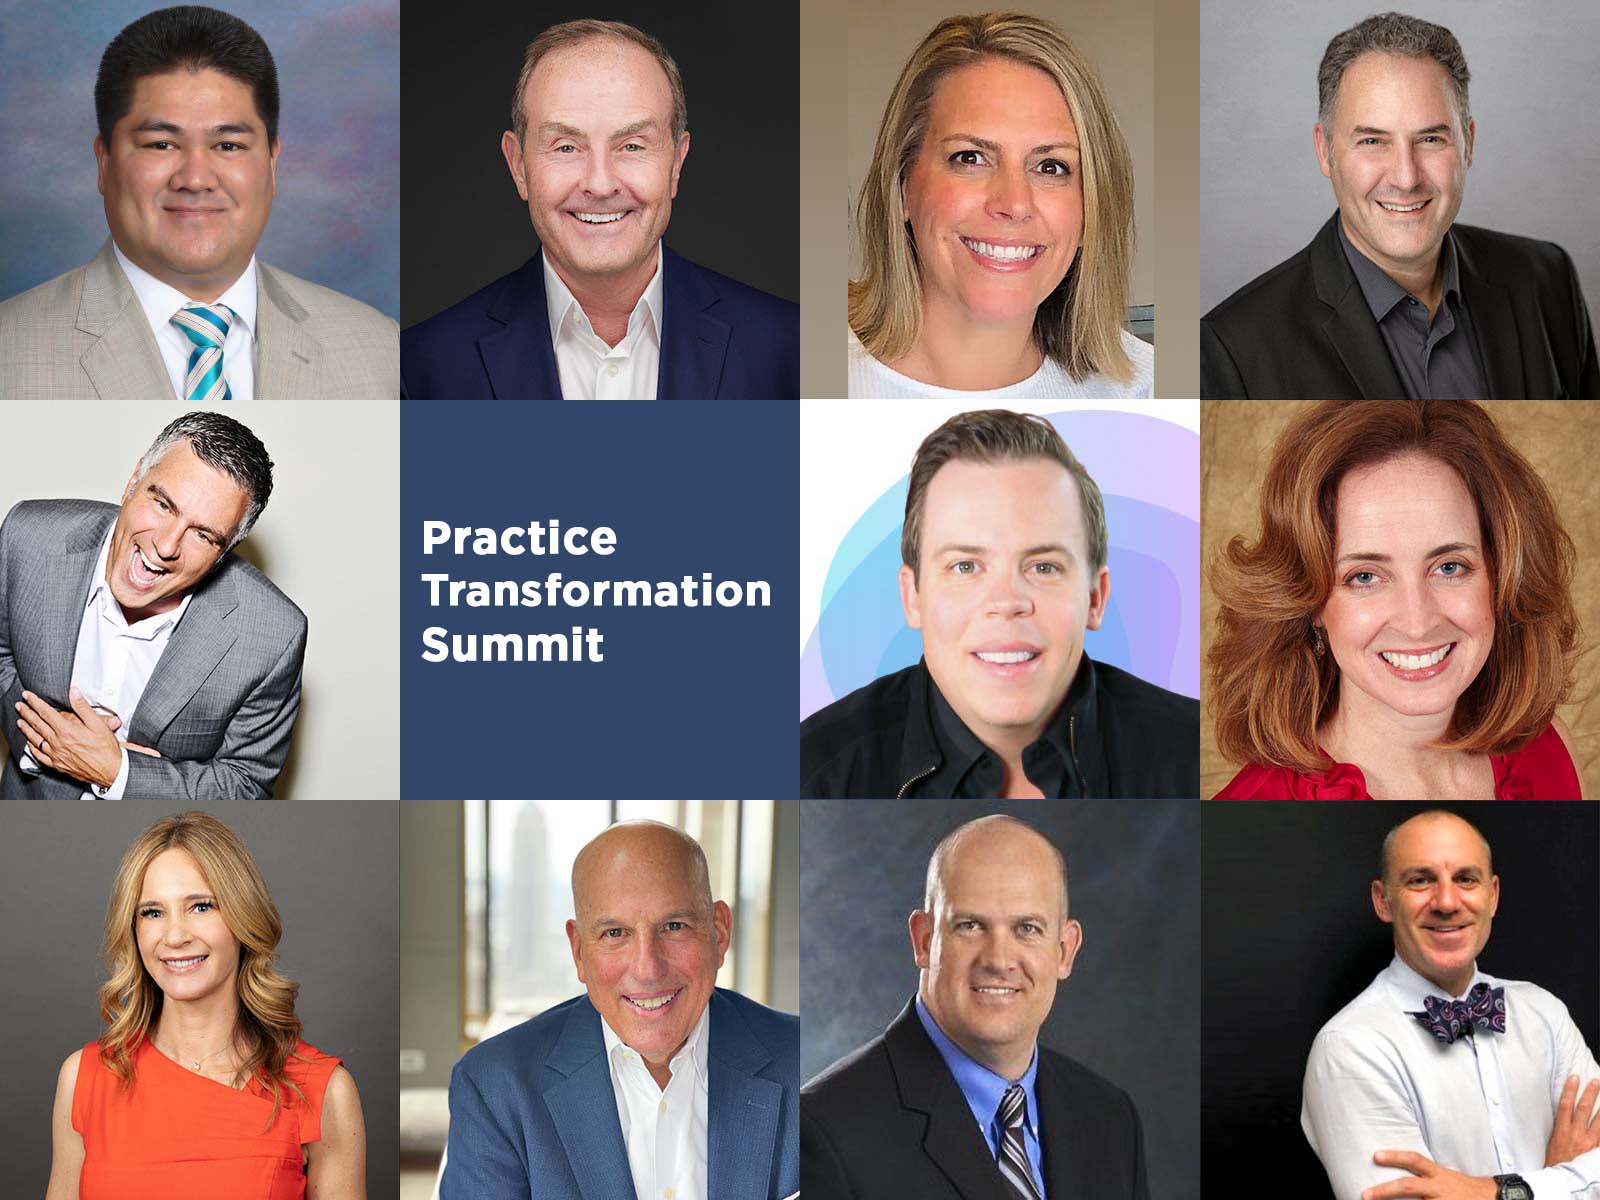 Collage of headshots of presenters for practice transformation summit